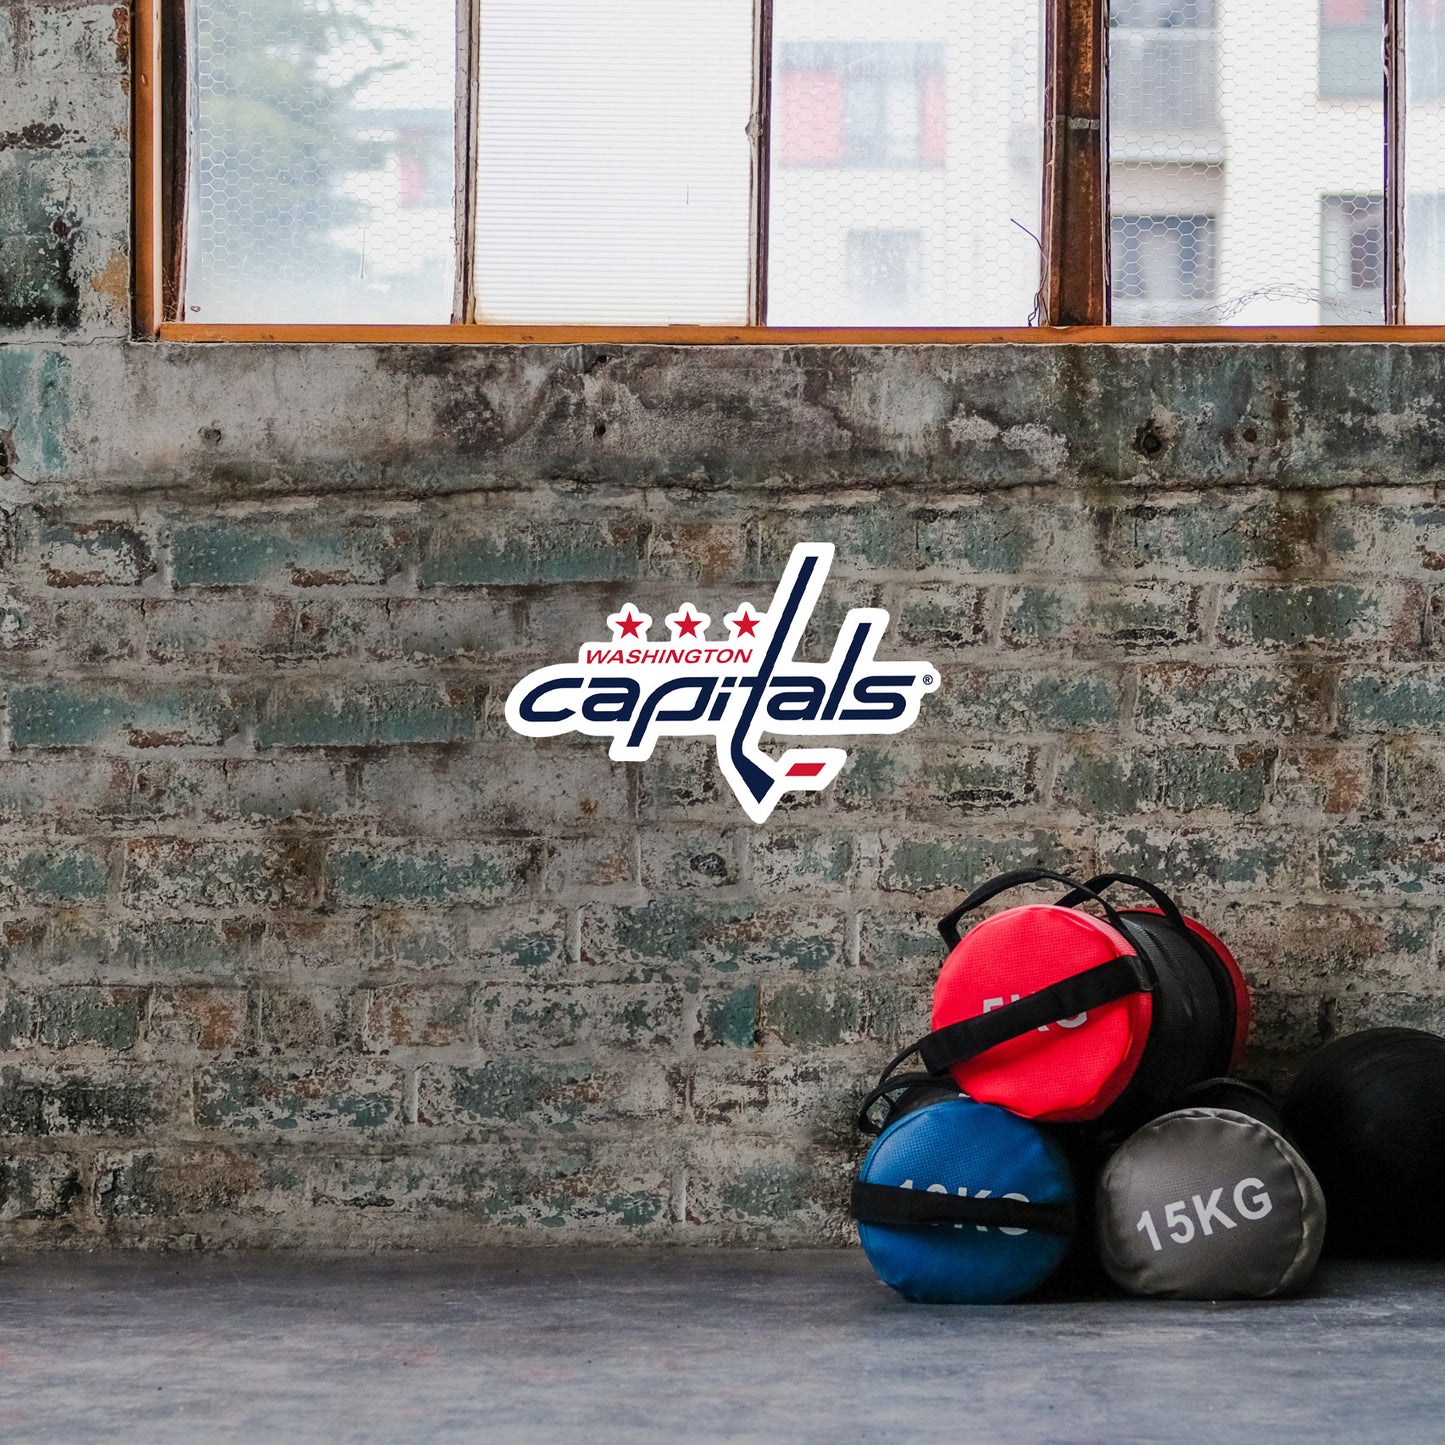 Washington Capitals:   Outdoor Logo        - Officially Licensed NHL    Outdoor Graphic